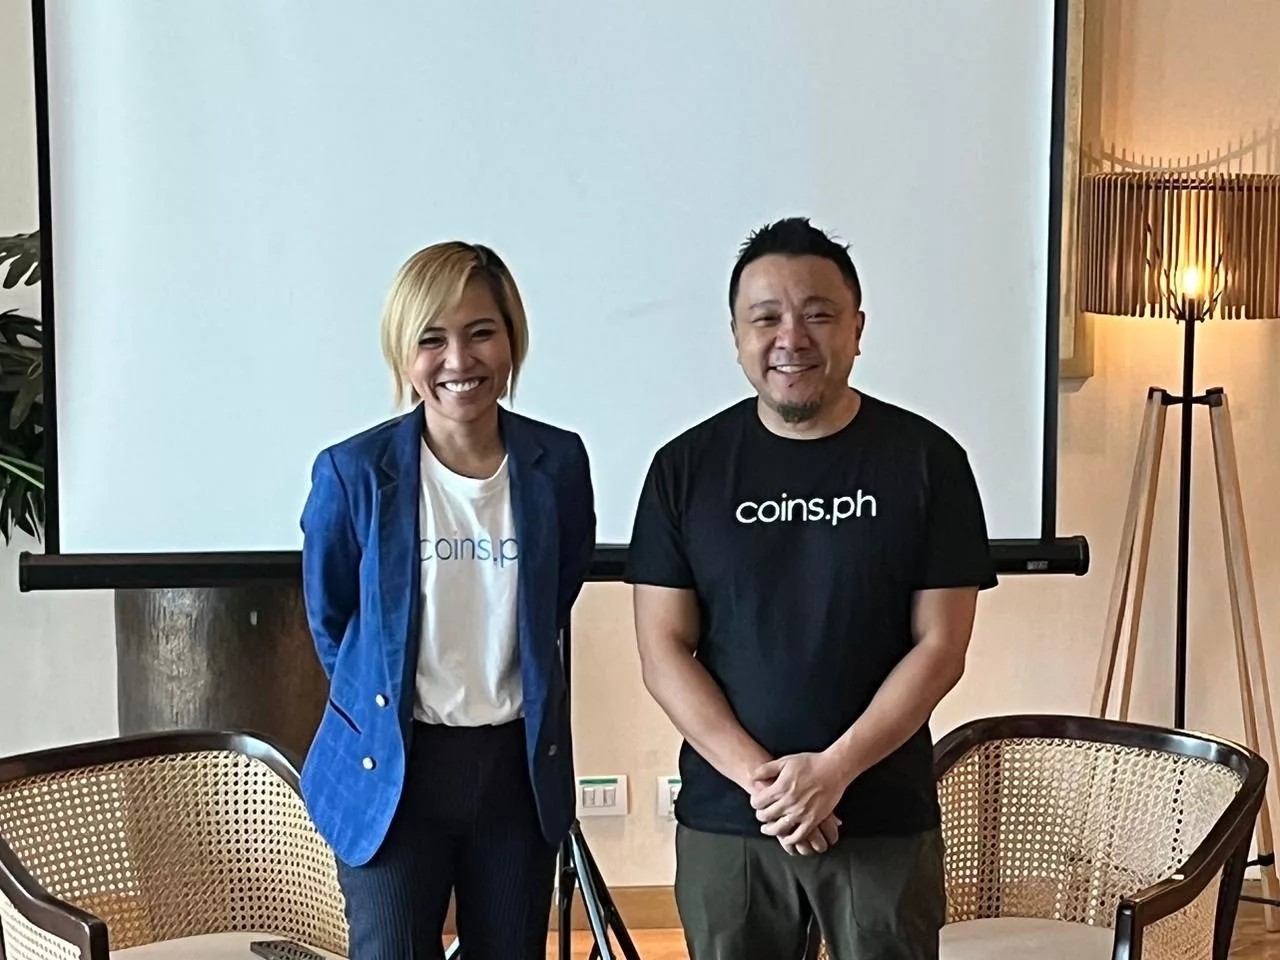 Coins.ph Aims For Global Reach, Targets Expansion Into Europe And Latin America